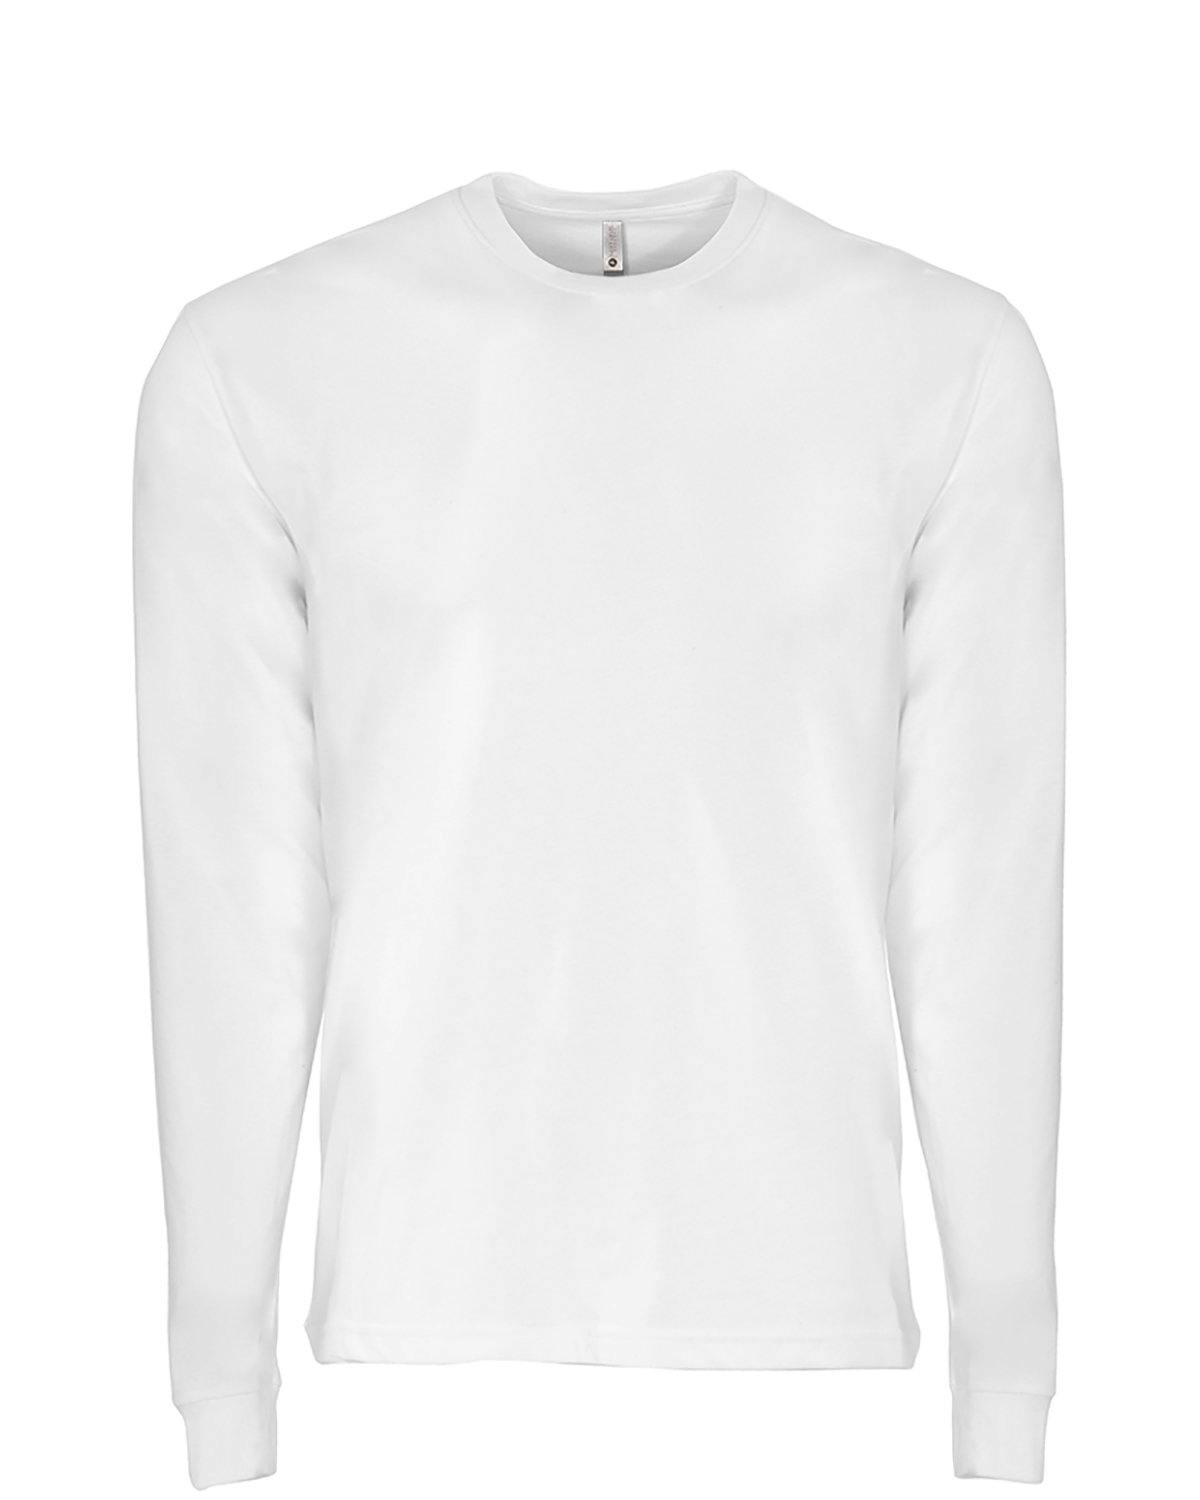 Image for Unisex Sueded Long-Sleeve Crew